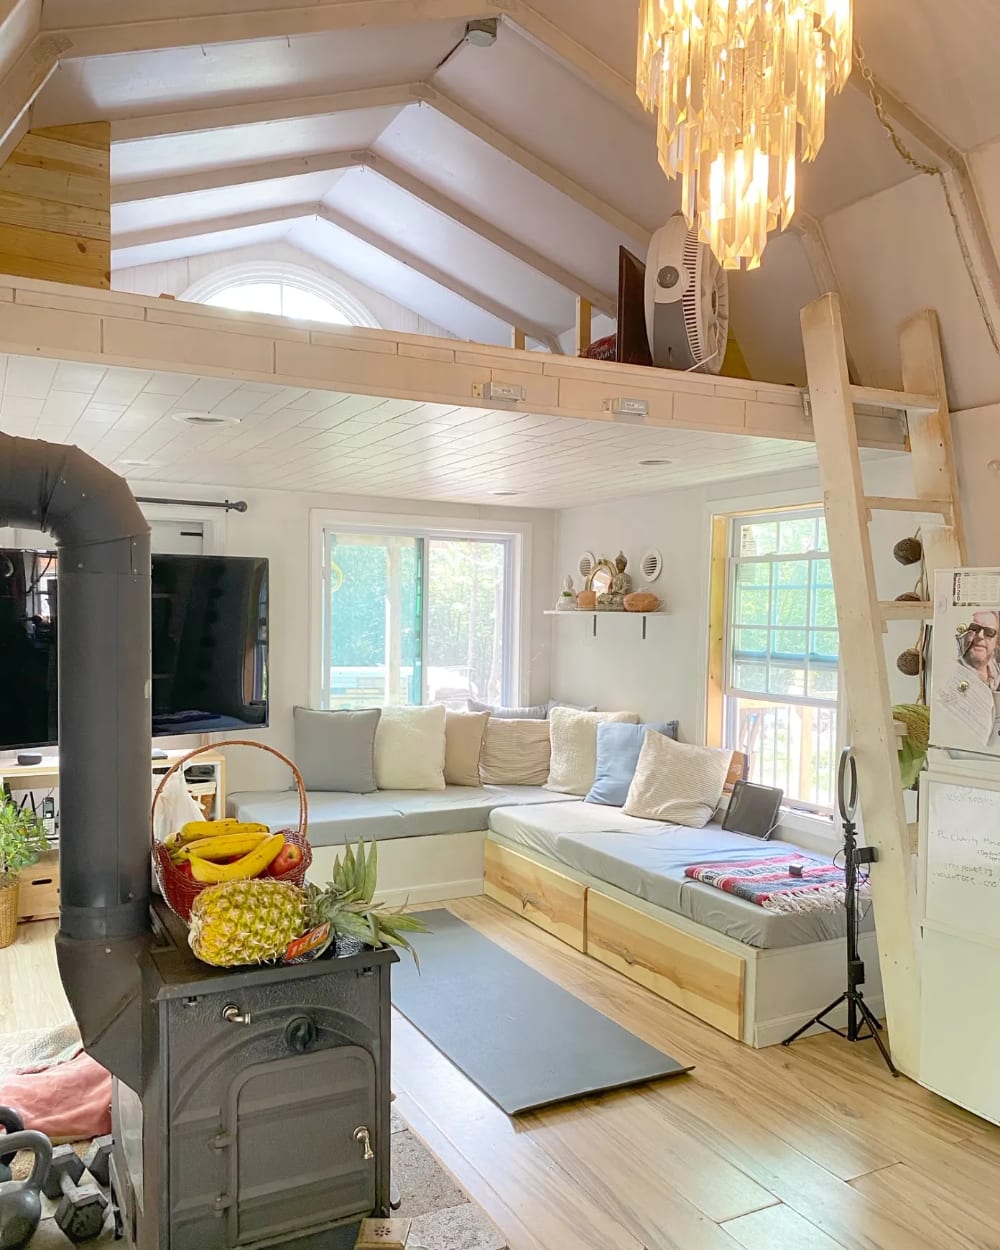 A 304-Square-Foot DIY Tiny House with a Greenhouse Bathroom Is Just One of the Reasons This Off-Grid Homestead Is a Dreamy Paradise